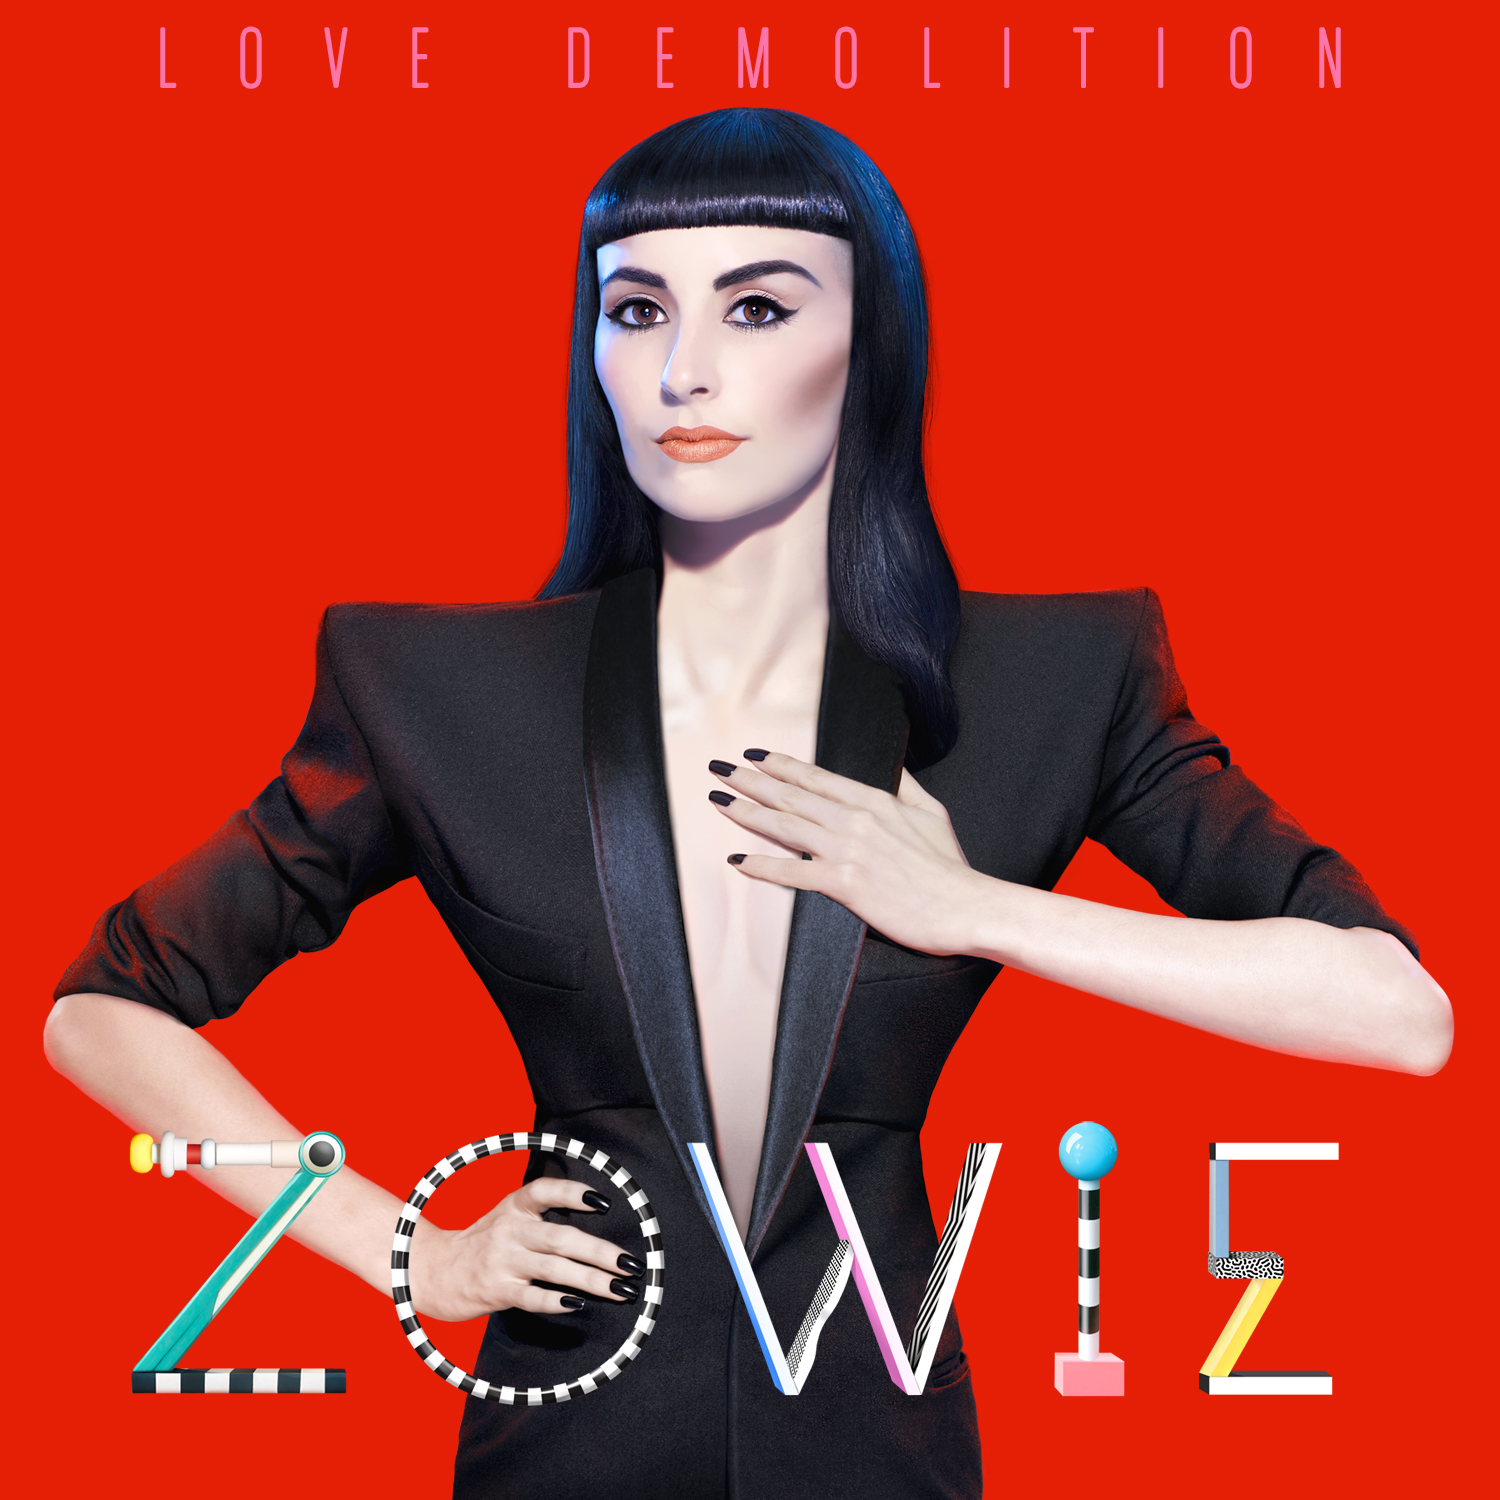 Zowie Love Demoltion Cover.jpeg